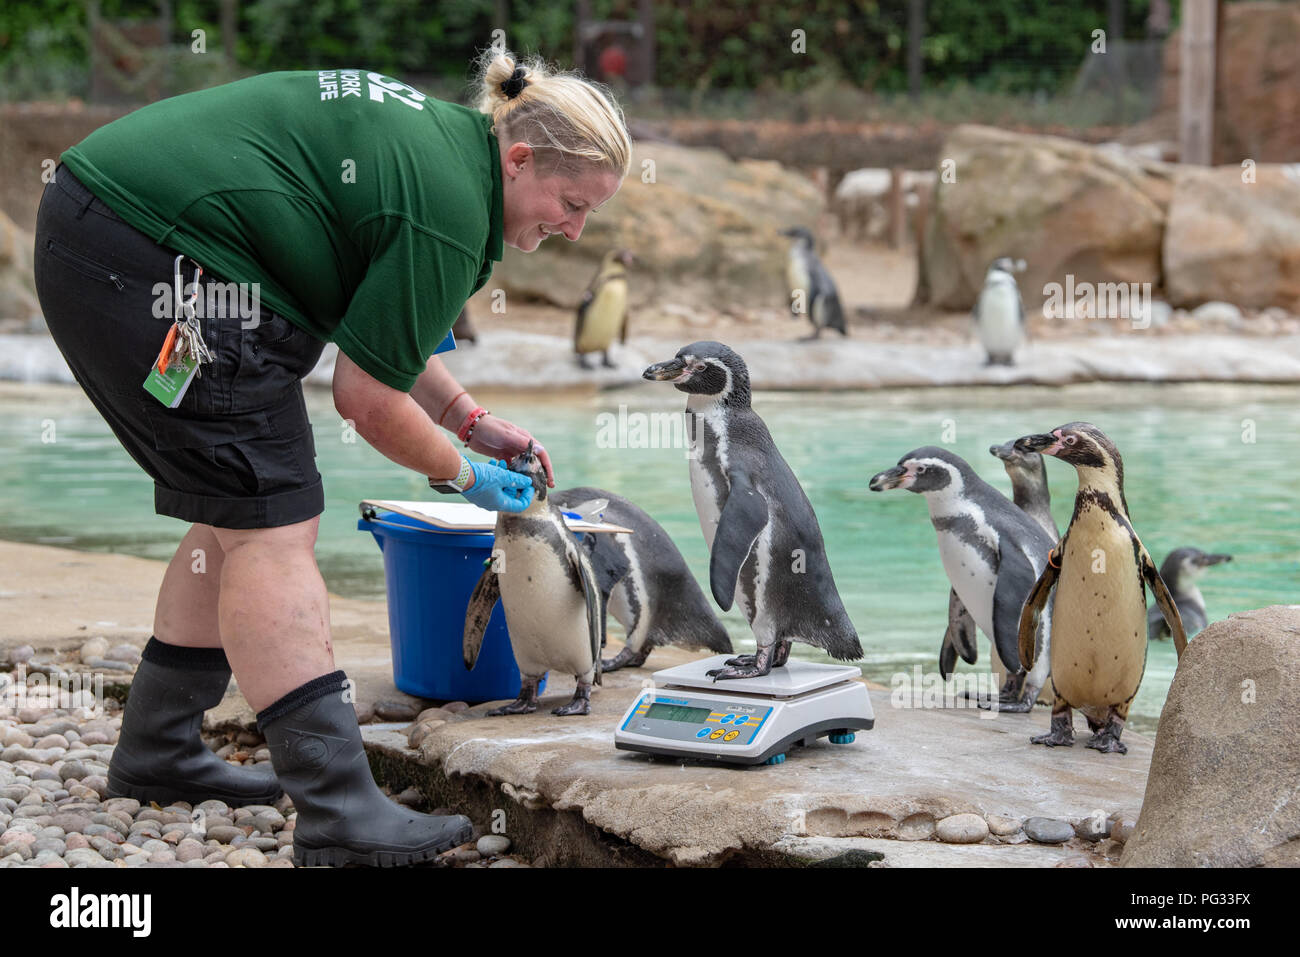 London, United Kingdom. 23 August 2018. Annual weigh-in records animals’ vital statistics at ZSL London Zoo. Credit: Peter Manning/Alamy Live News Stock Photo